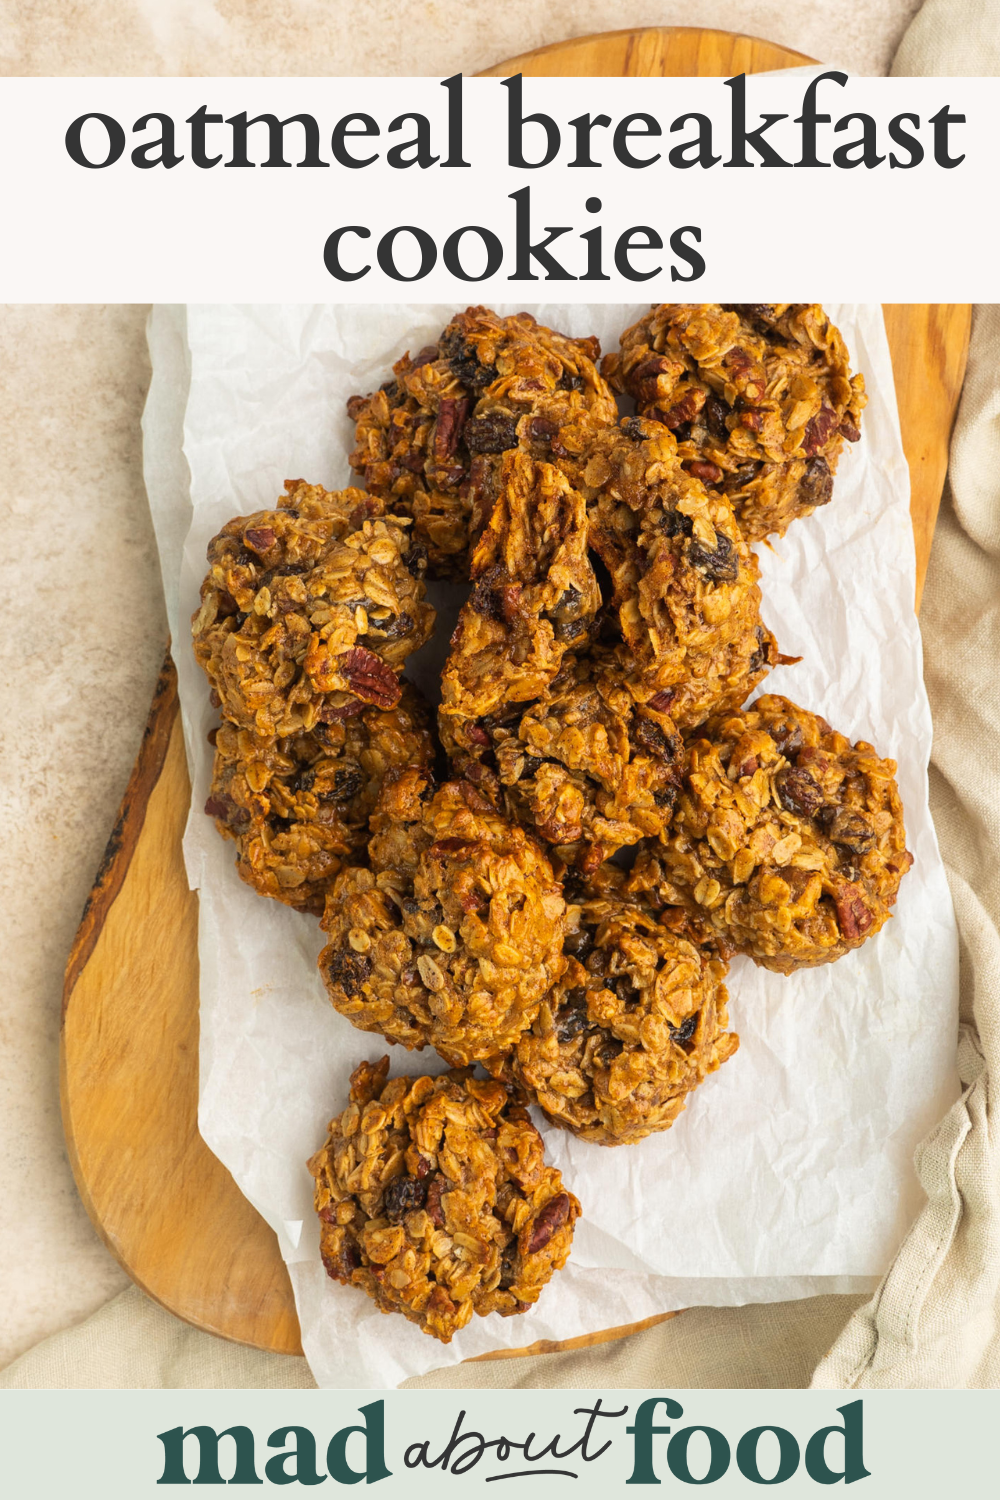 Image for pinning Oatmeal Breakfast Cookies Recipe on Pinterest